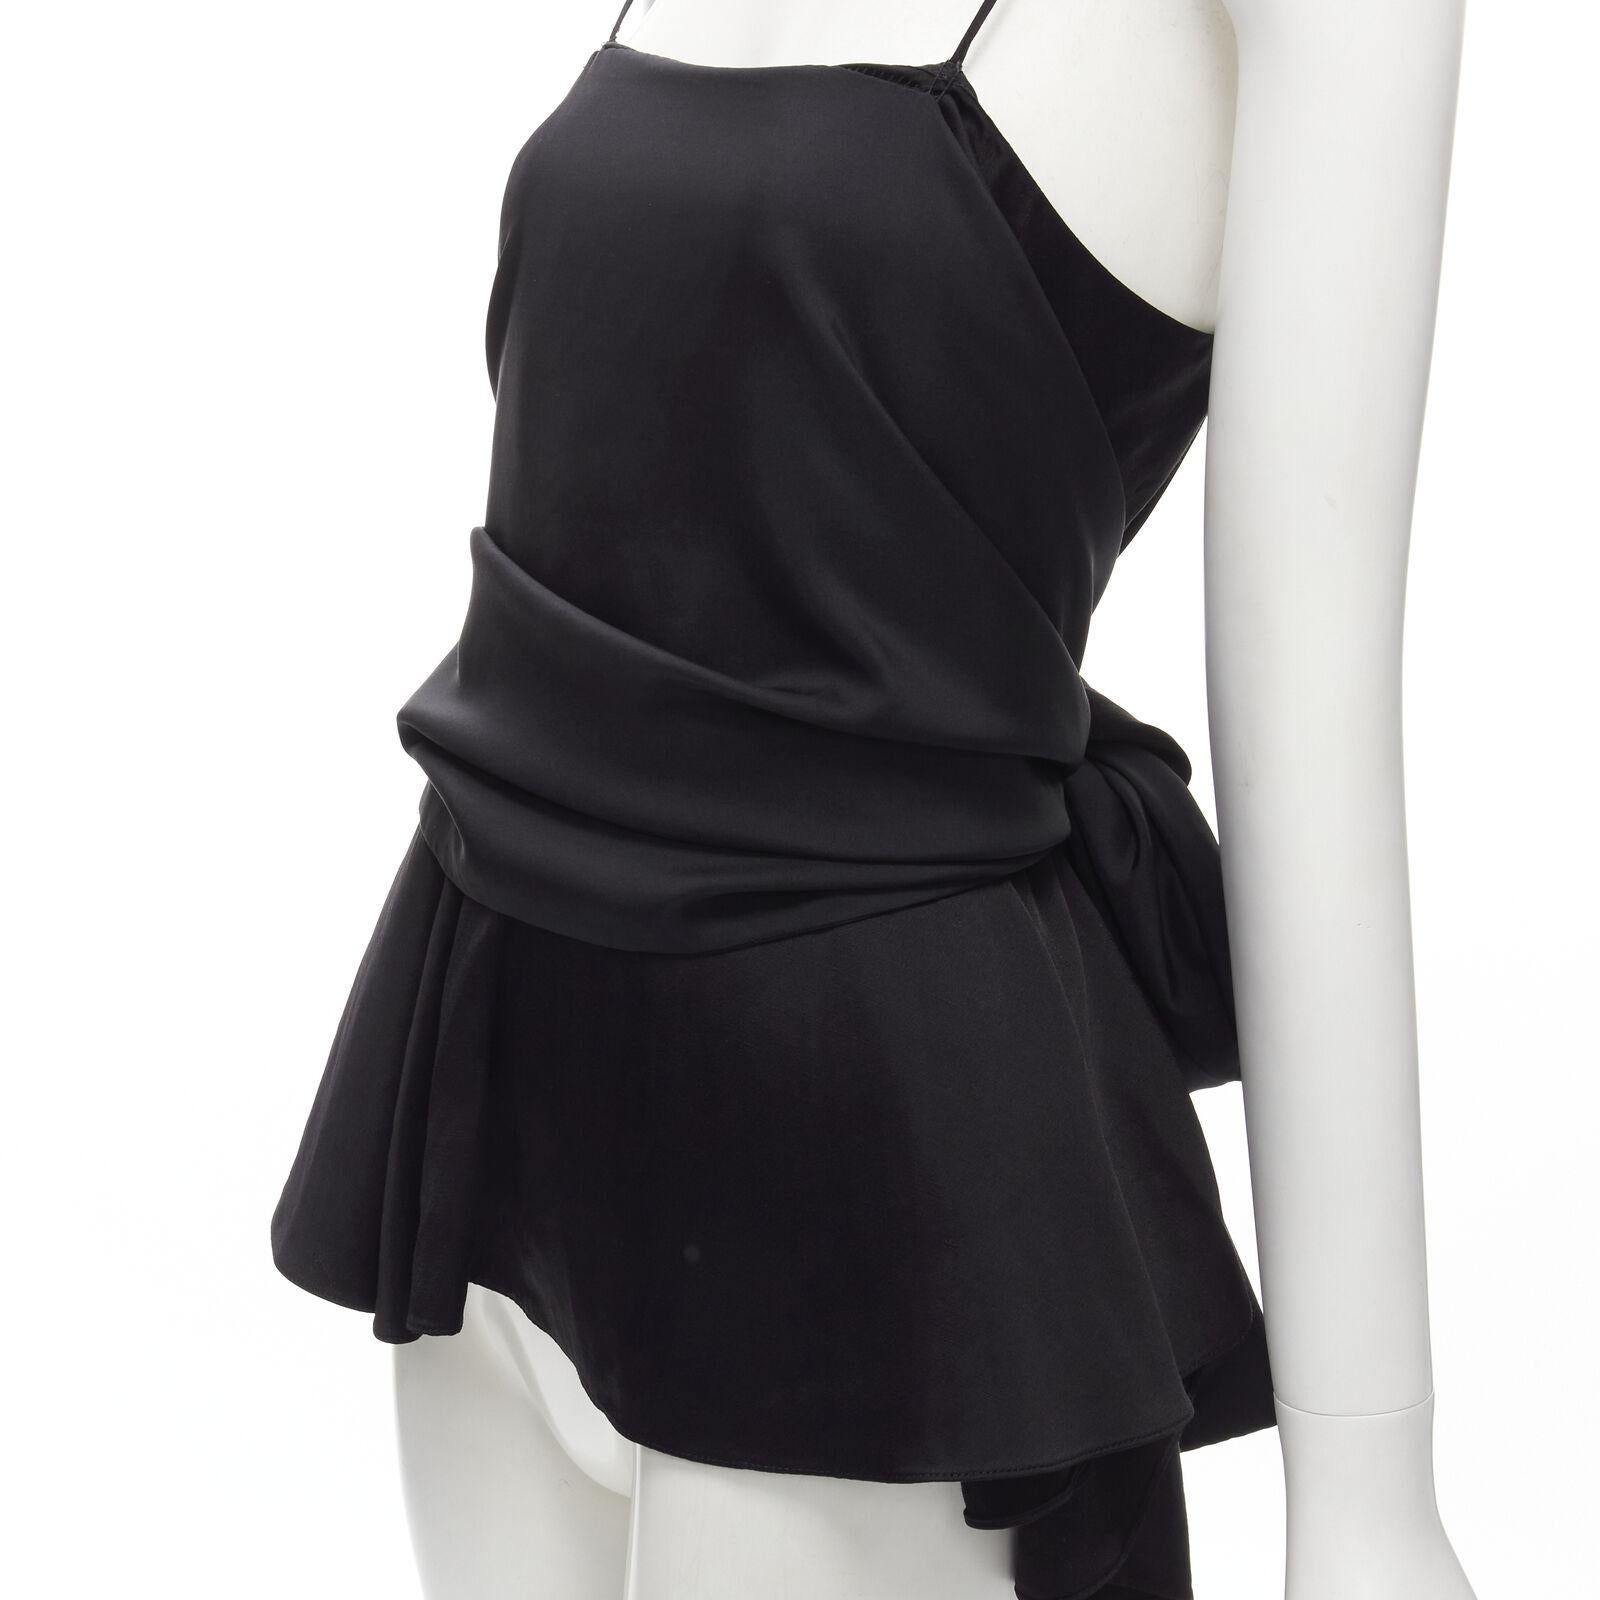 THE ROW black XL bow tie back high low hem spaghetti strap cami tank top US0 XS
Reference: KEDG/A00228
Brand: The Row
Designer: Mary Kate and Ashley Olsen
Material: Viscose, Blend
Color: Black
Pattern: Solid
Closure: Self Tie
Lining: Fabric
Made in: